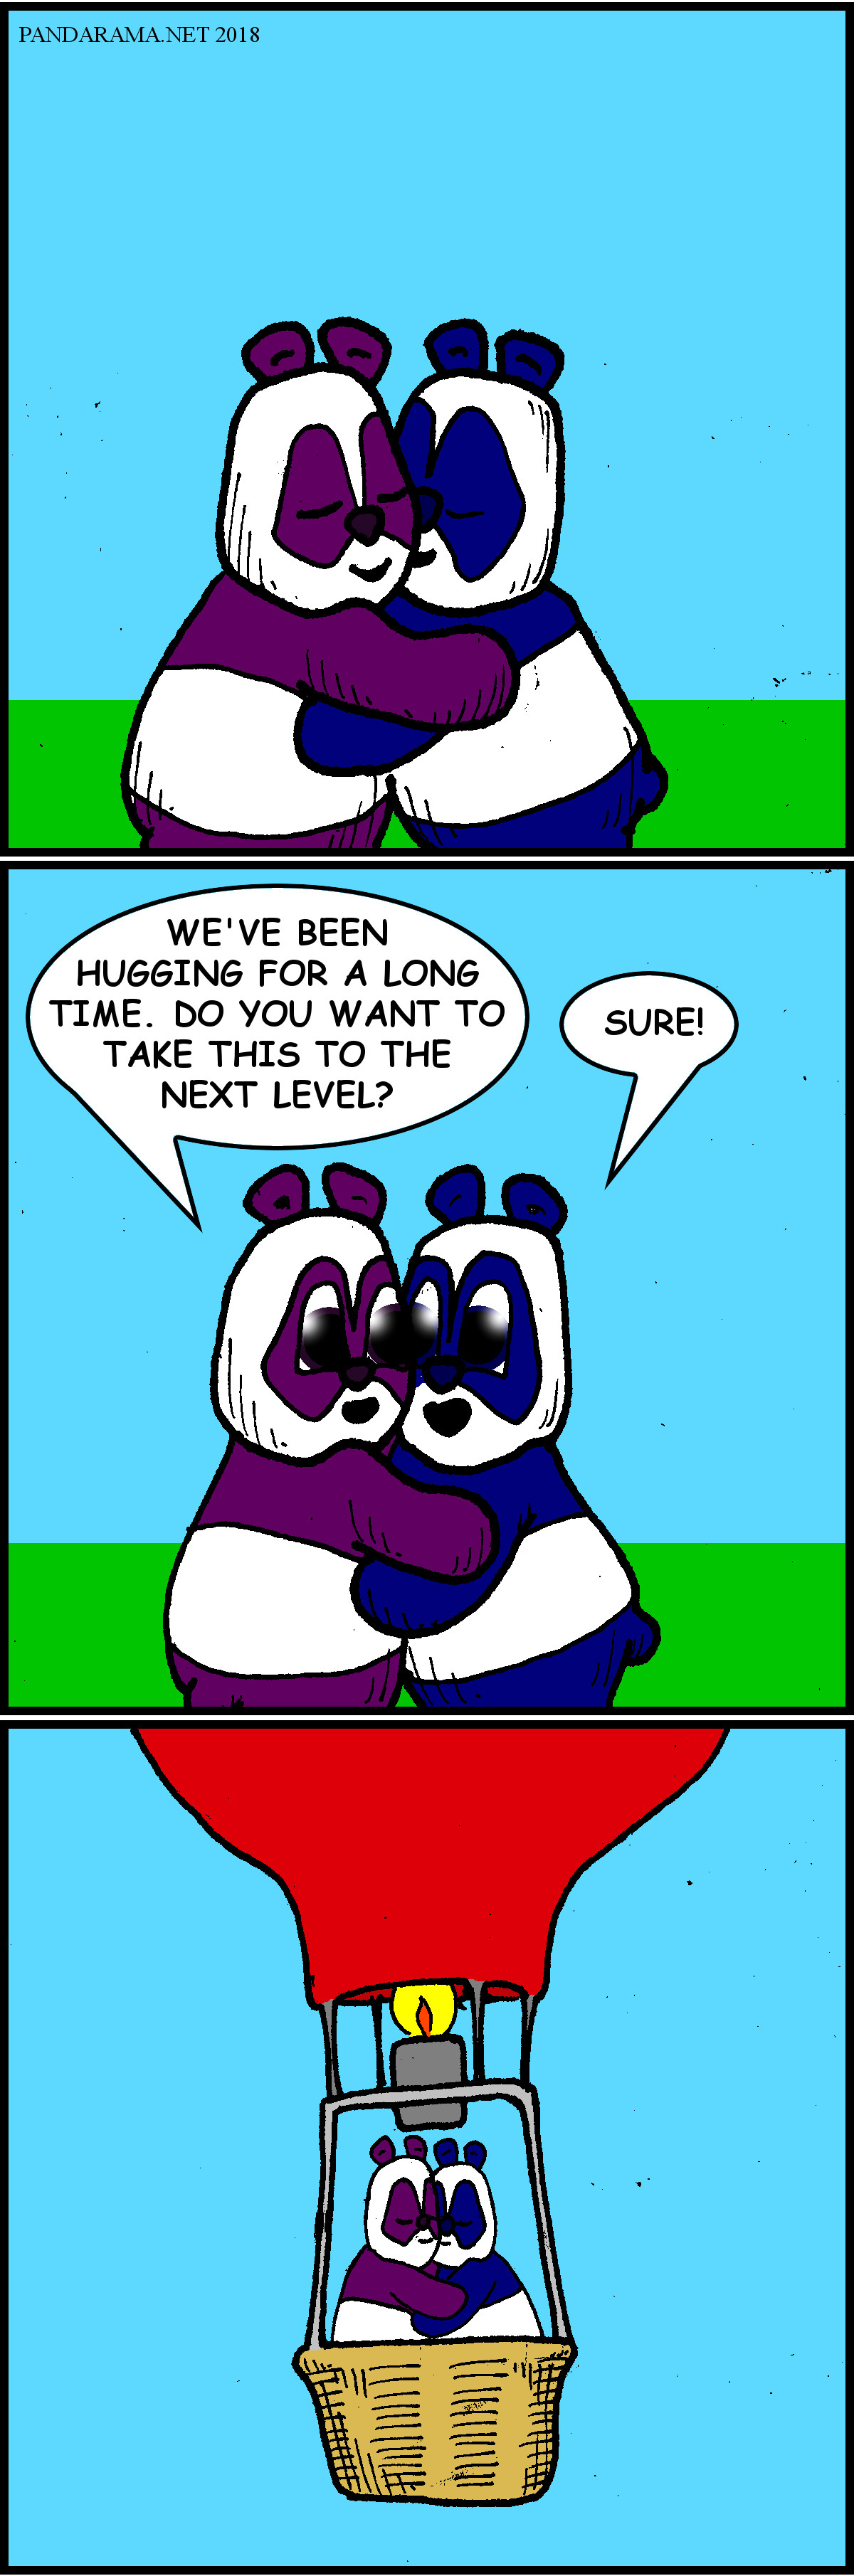 two pandas hugging. they agree to take things to the next level. then they hug in a balloon.